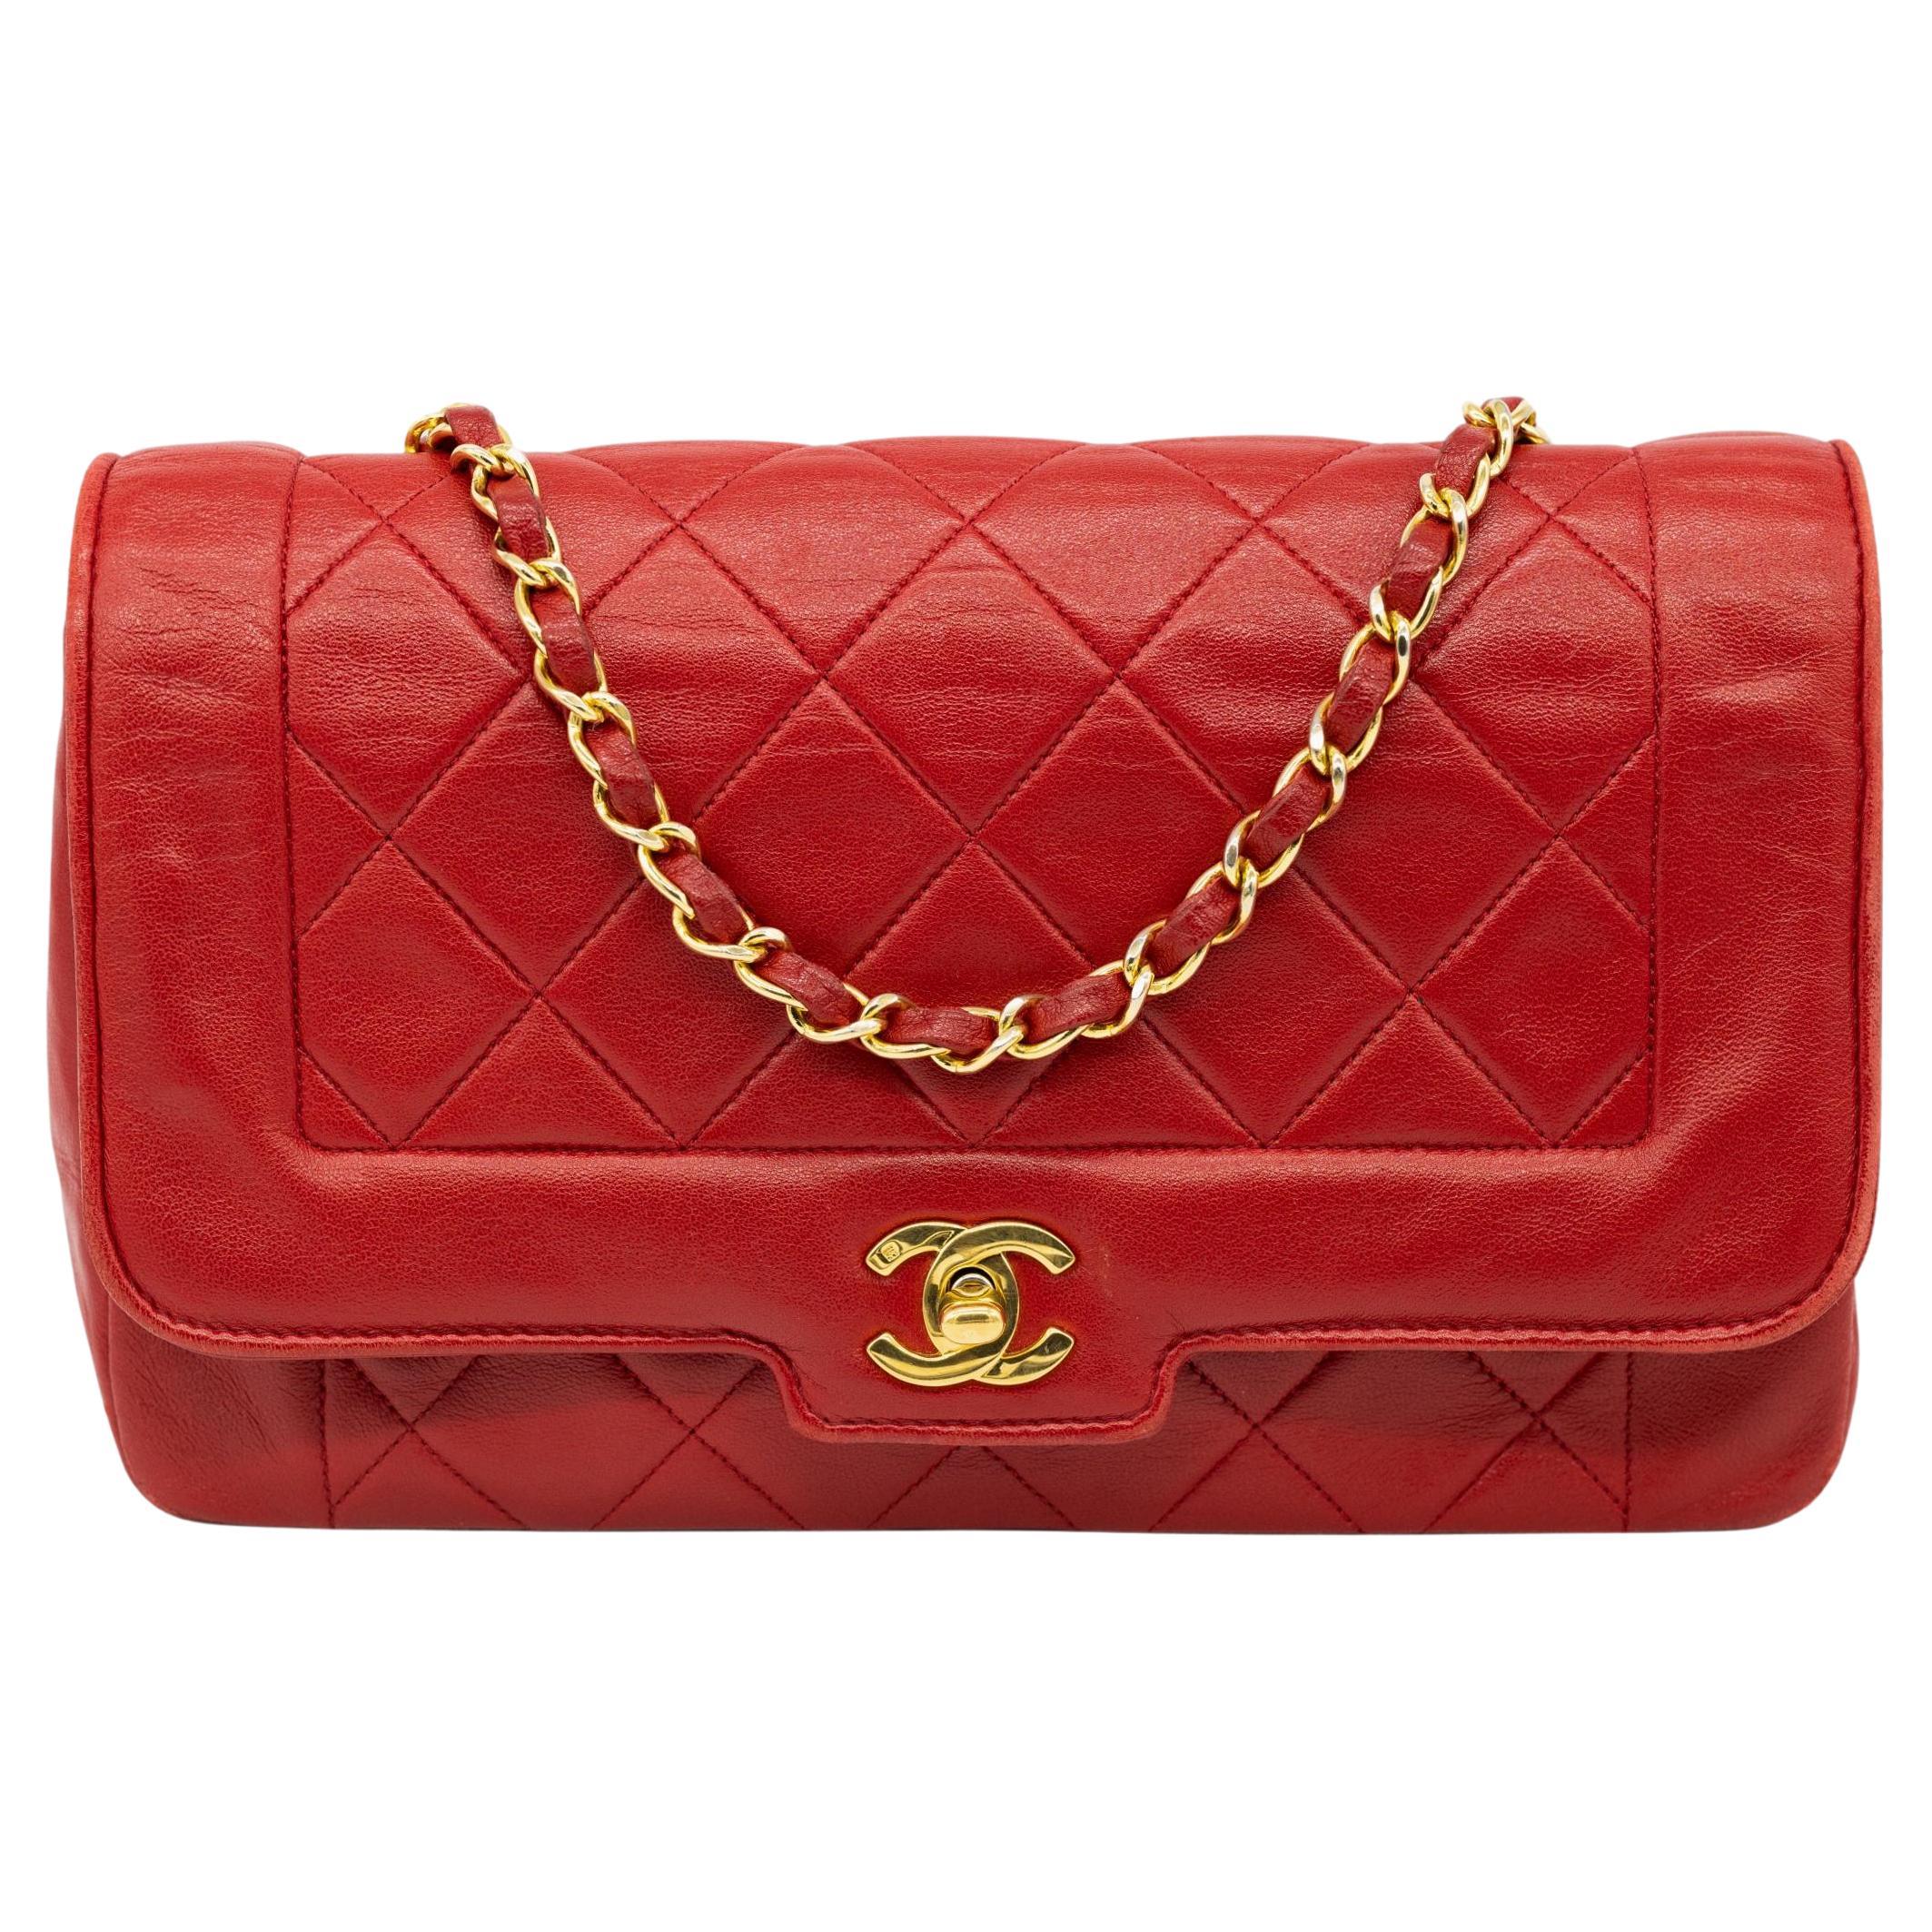 Chanel Vintage Red Lizard Envelope Cross Body Flap Bag with Gold